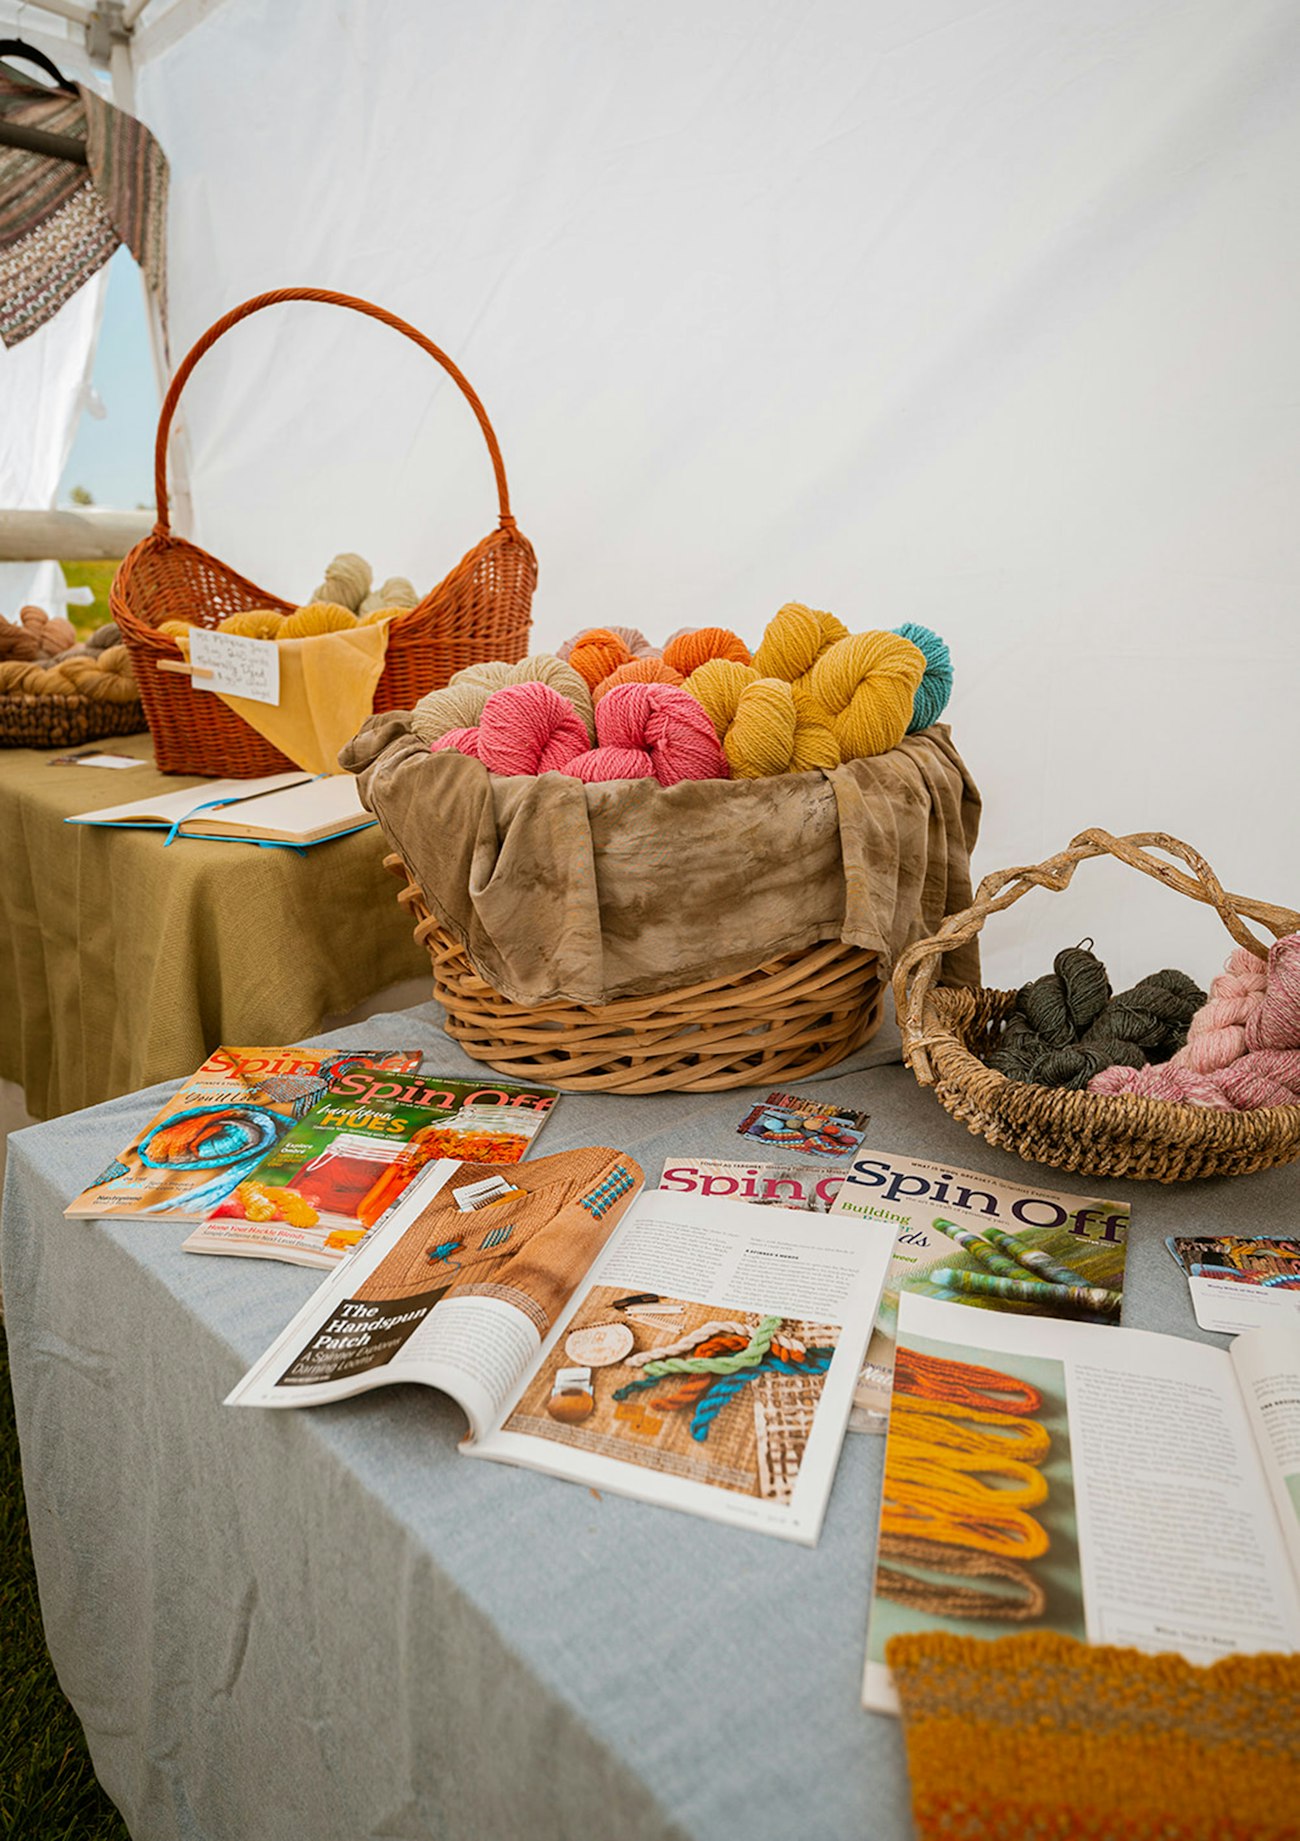 Magazines and yarns spread on table